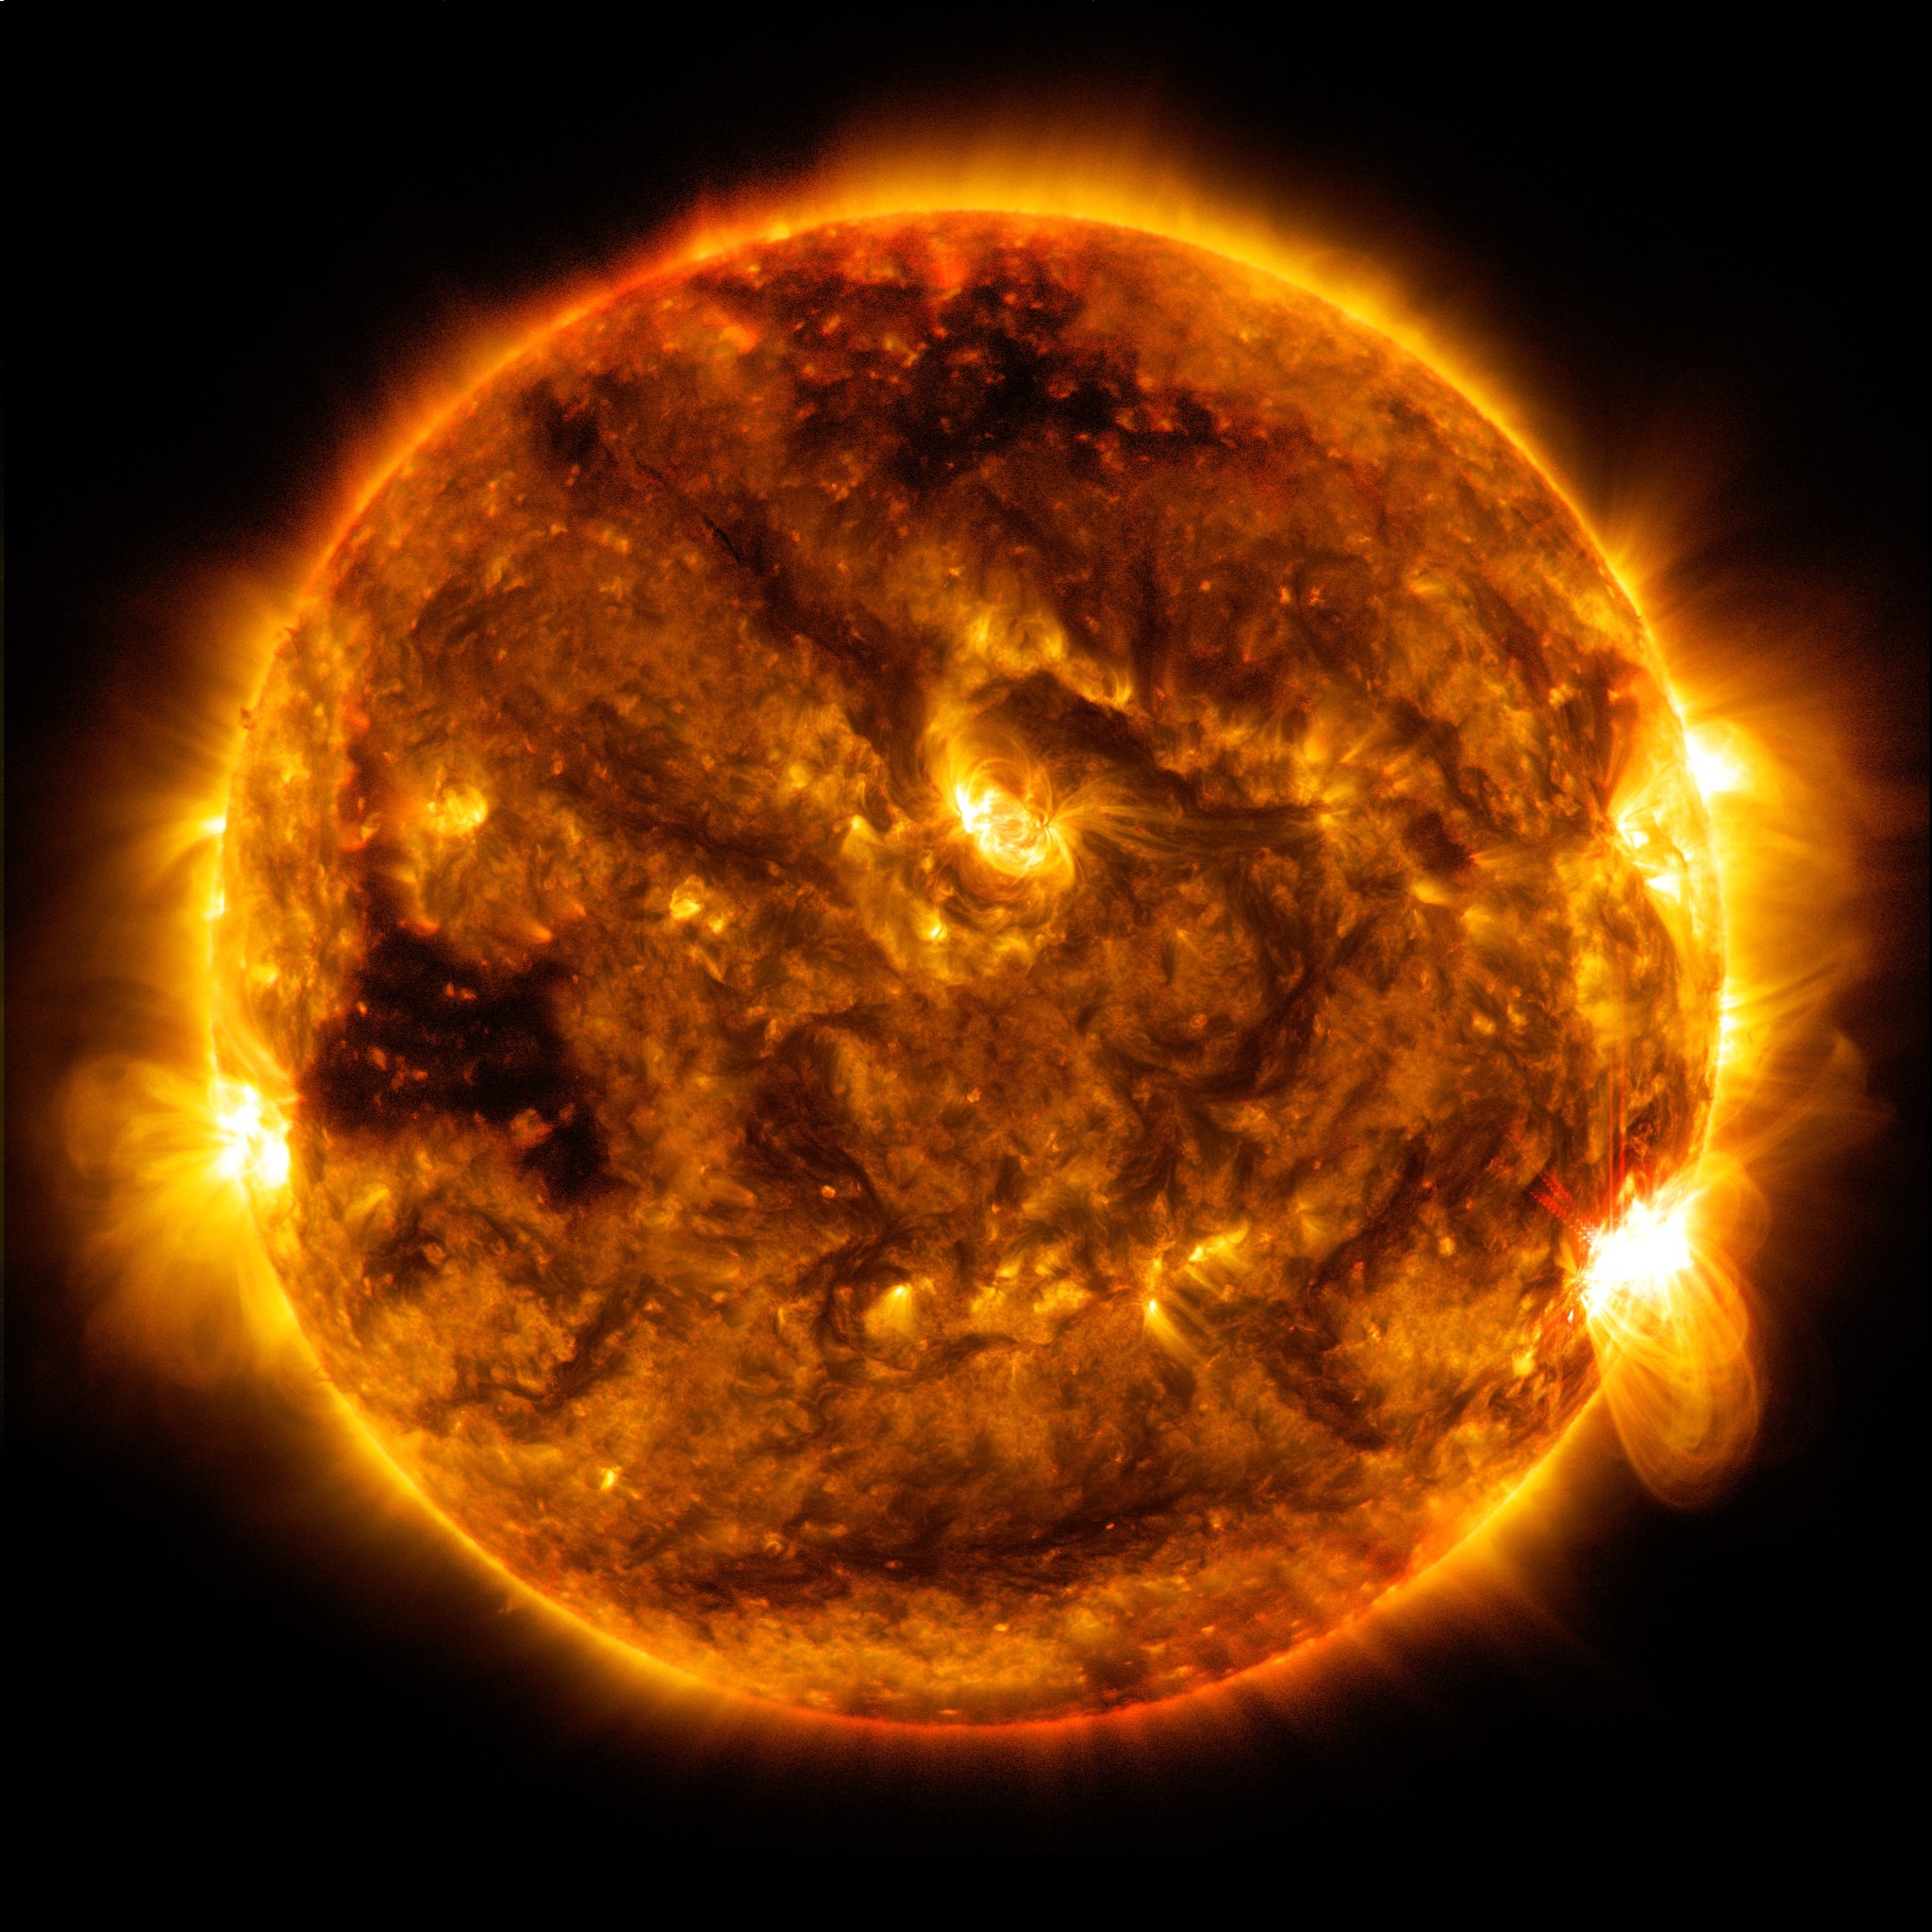 SDO image of flare from Oct. 1, 2015